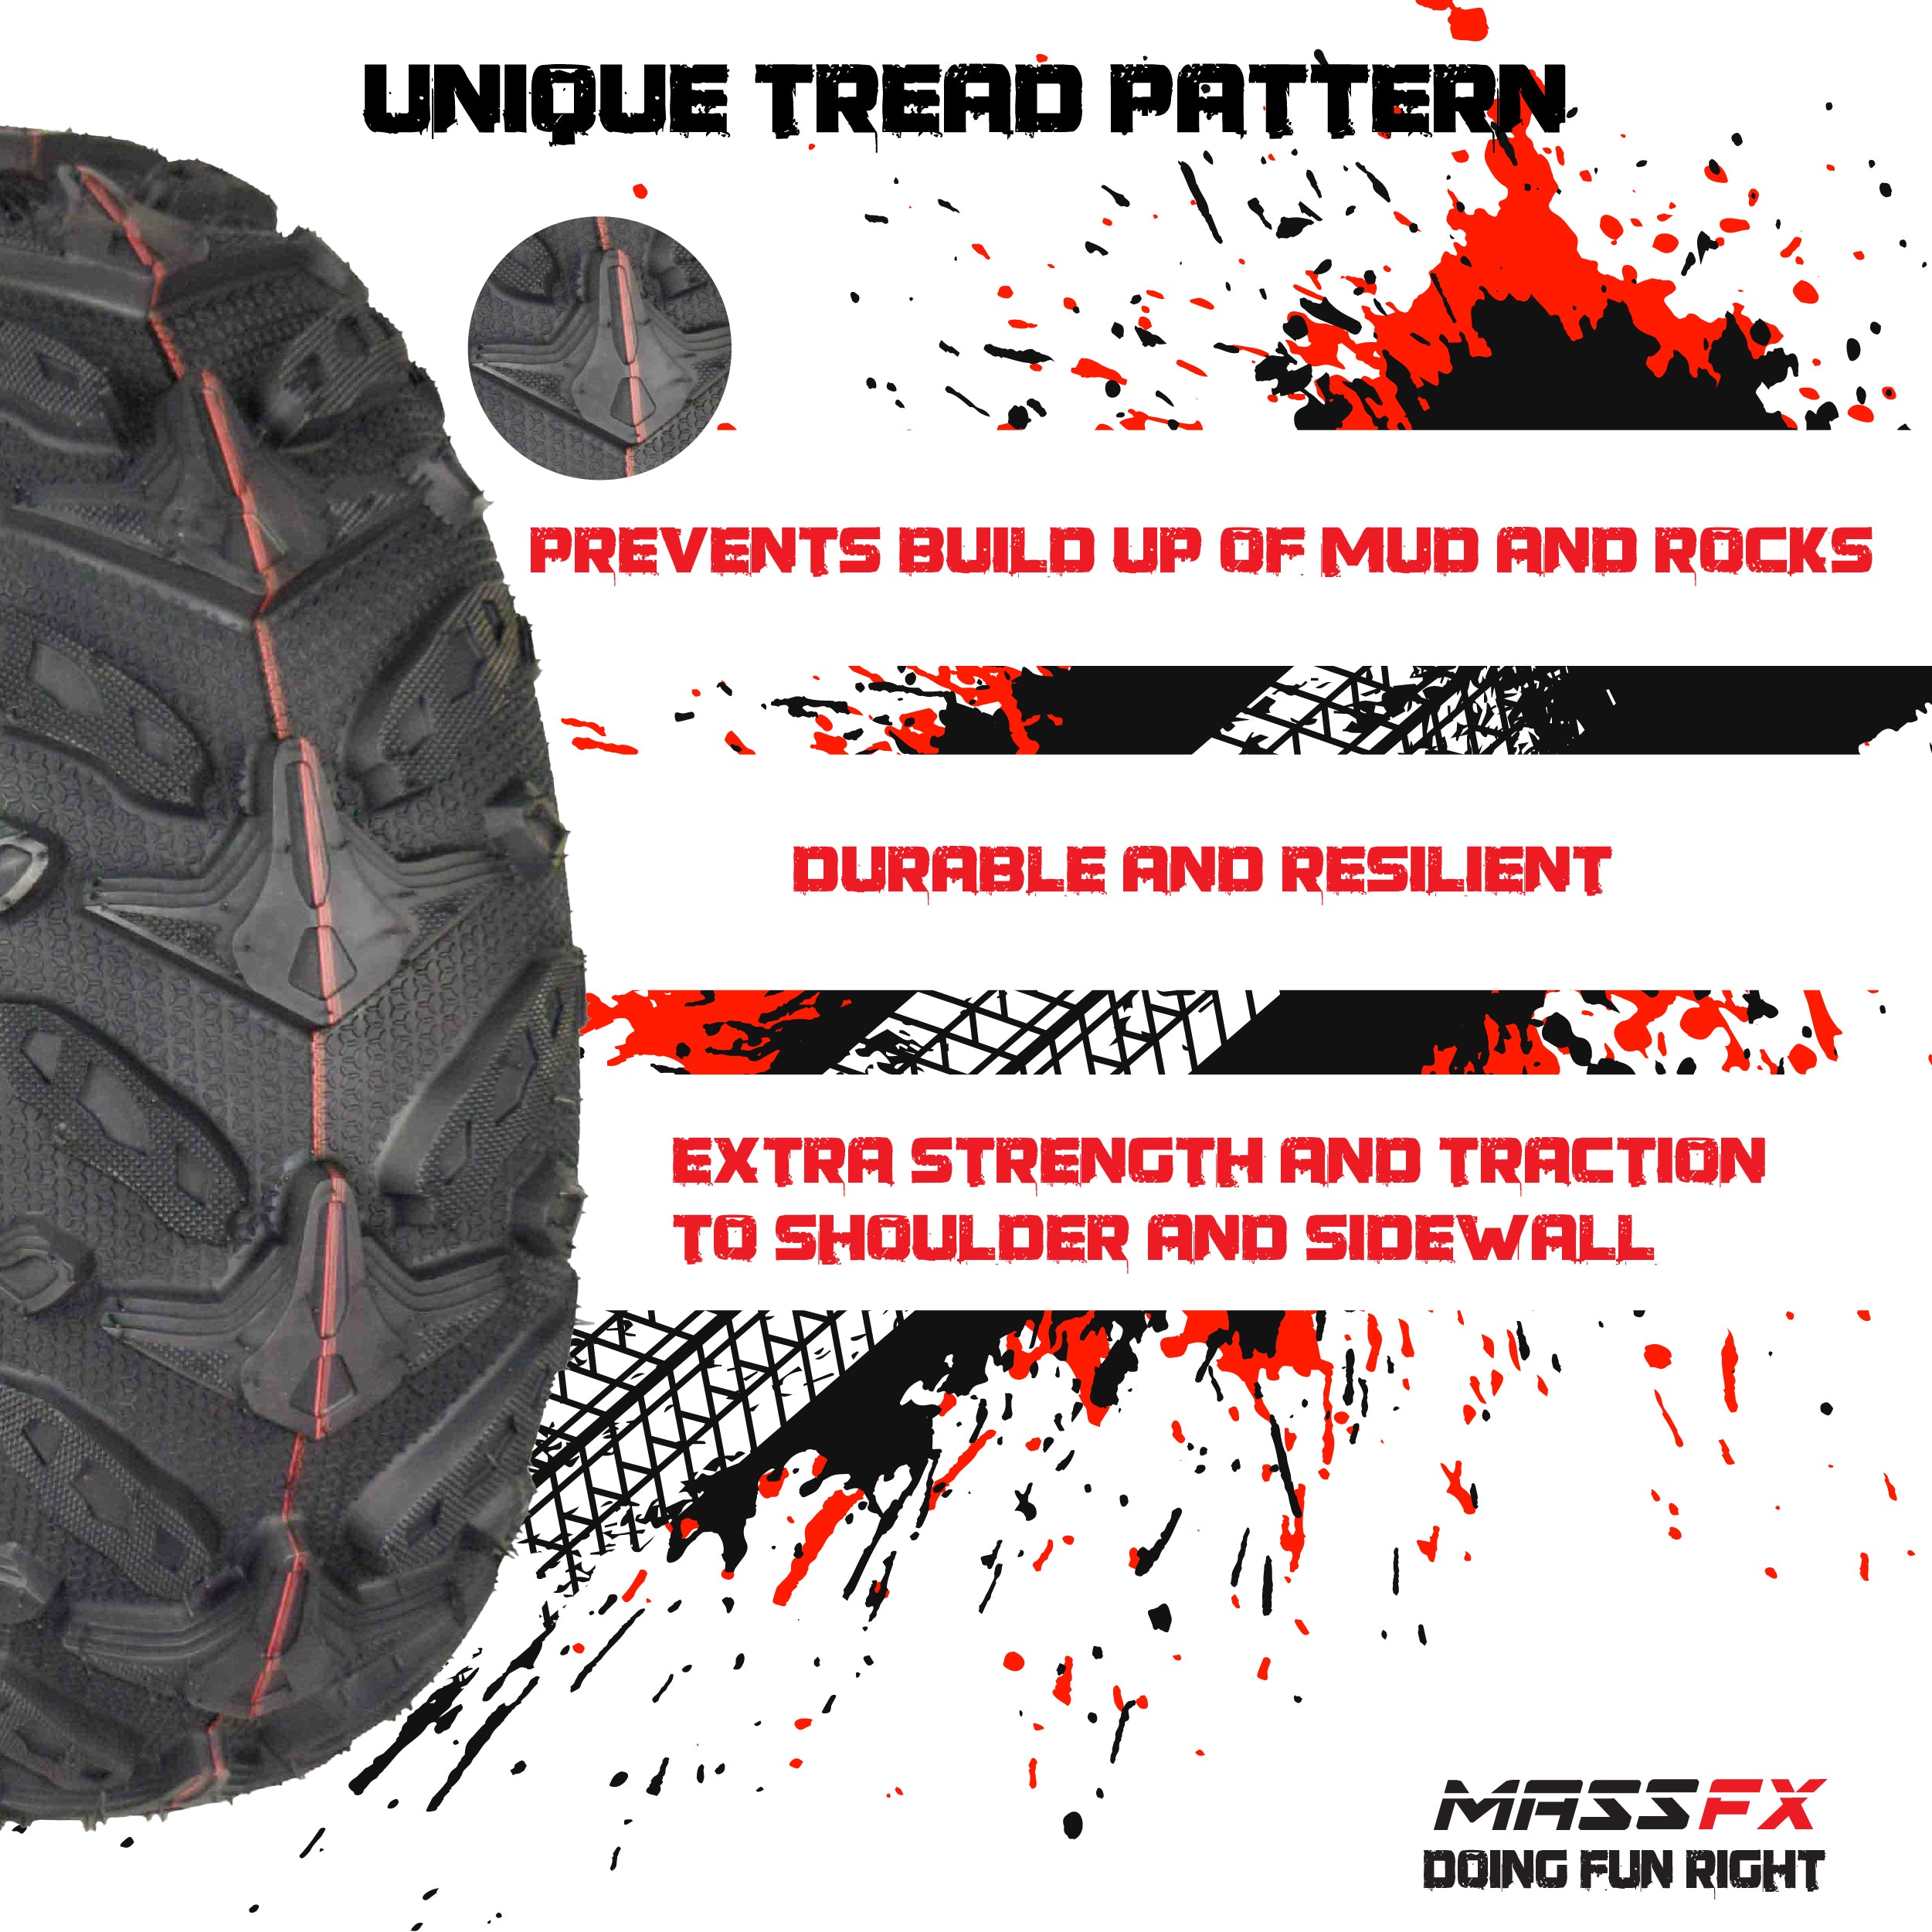 MASSFX Grinder 22x10-9 Rear ATV Tire 6 Ply for Soft/Hard Pack Ground